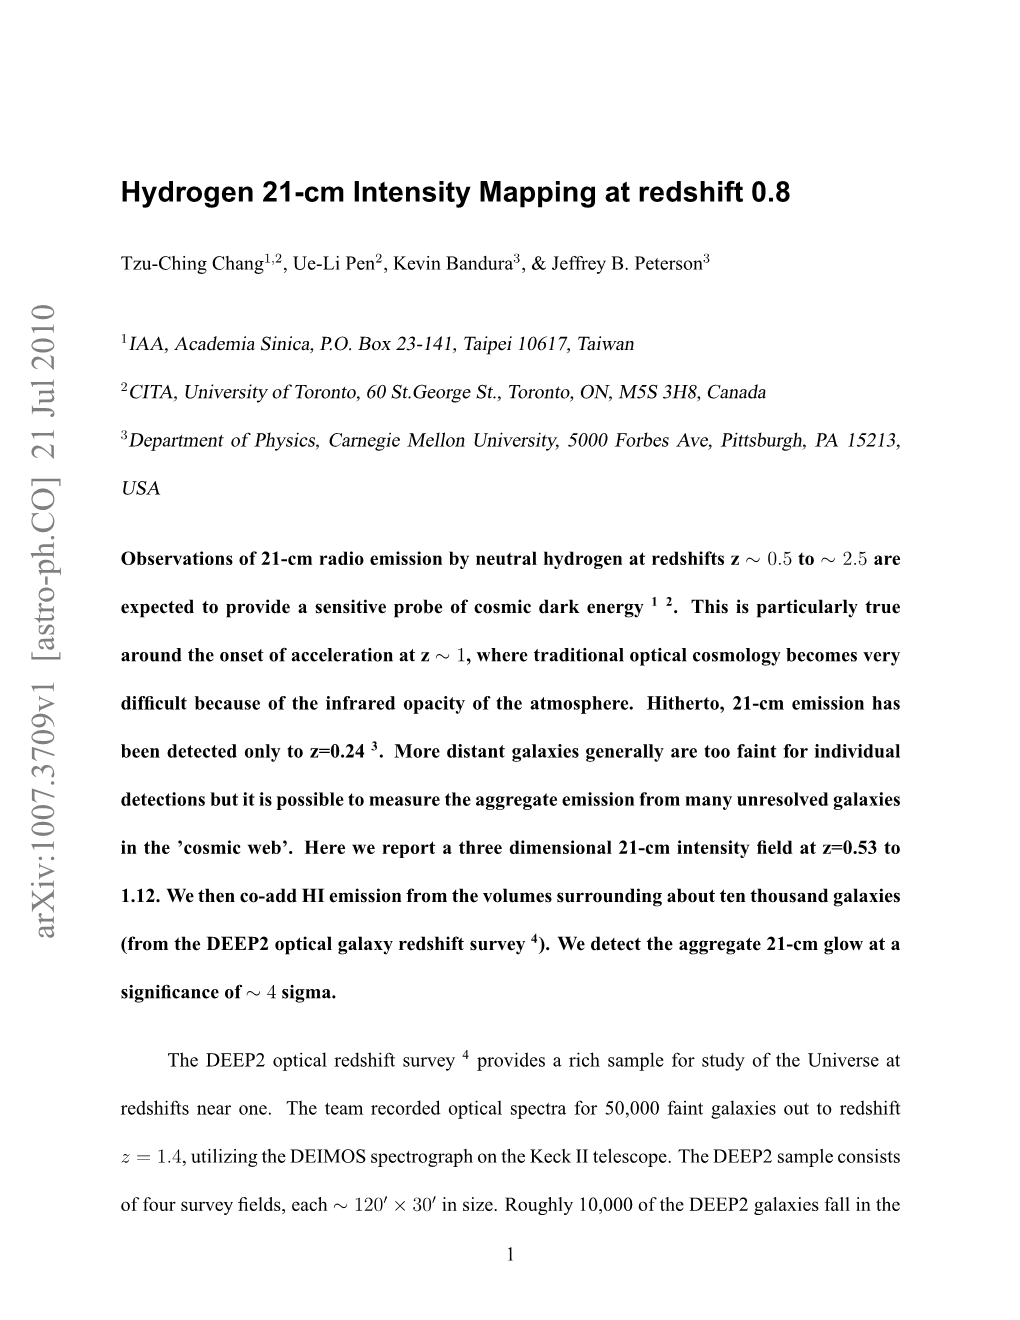 Hydrogen 21-Cm Intensity Mapping at Redshift